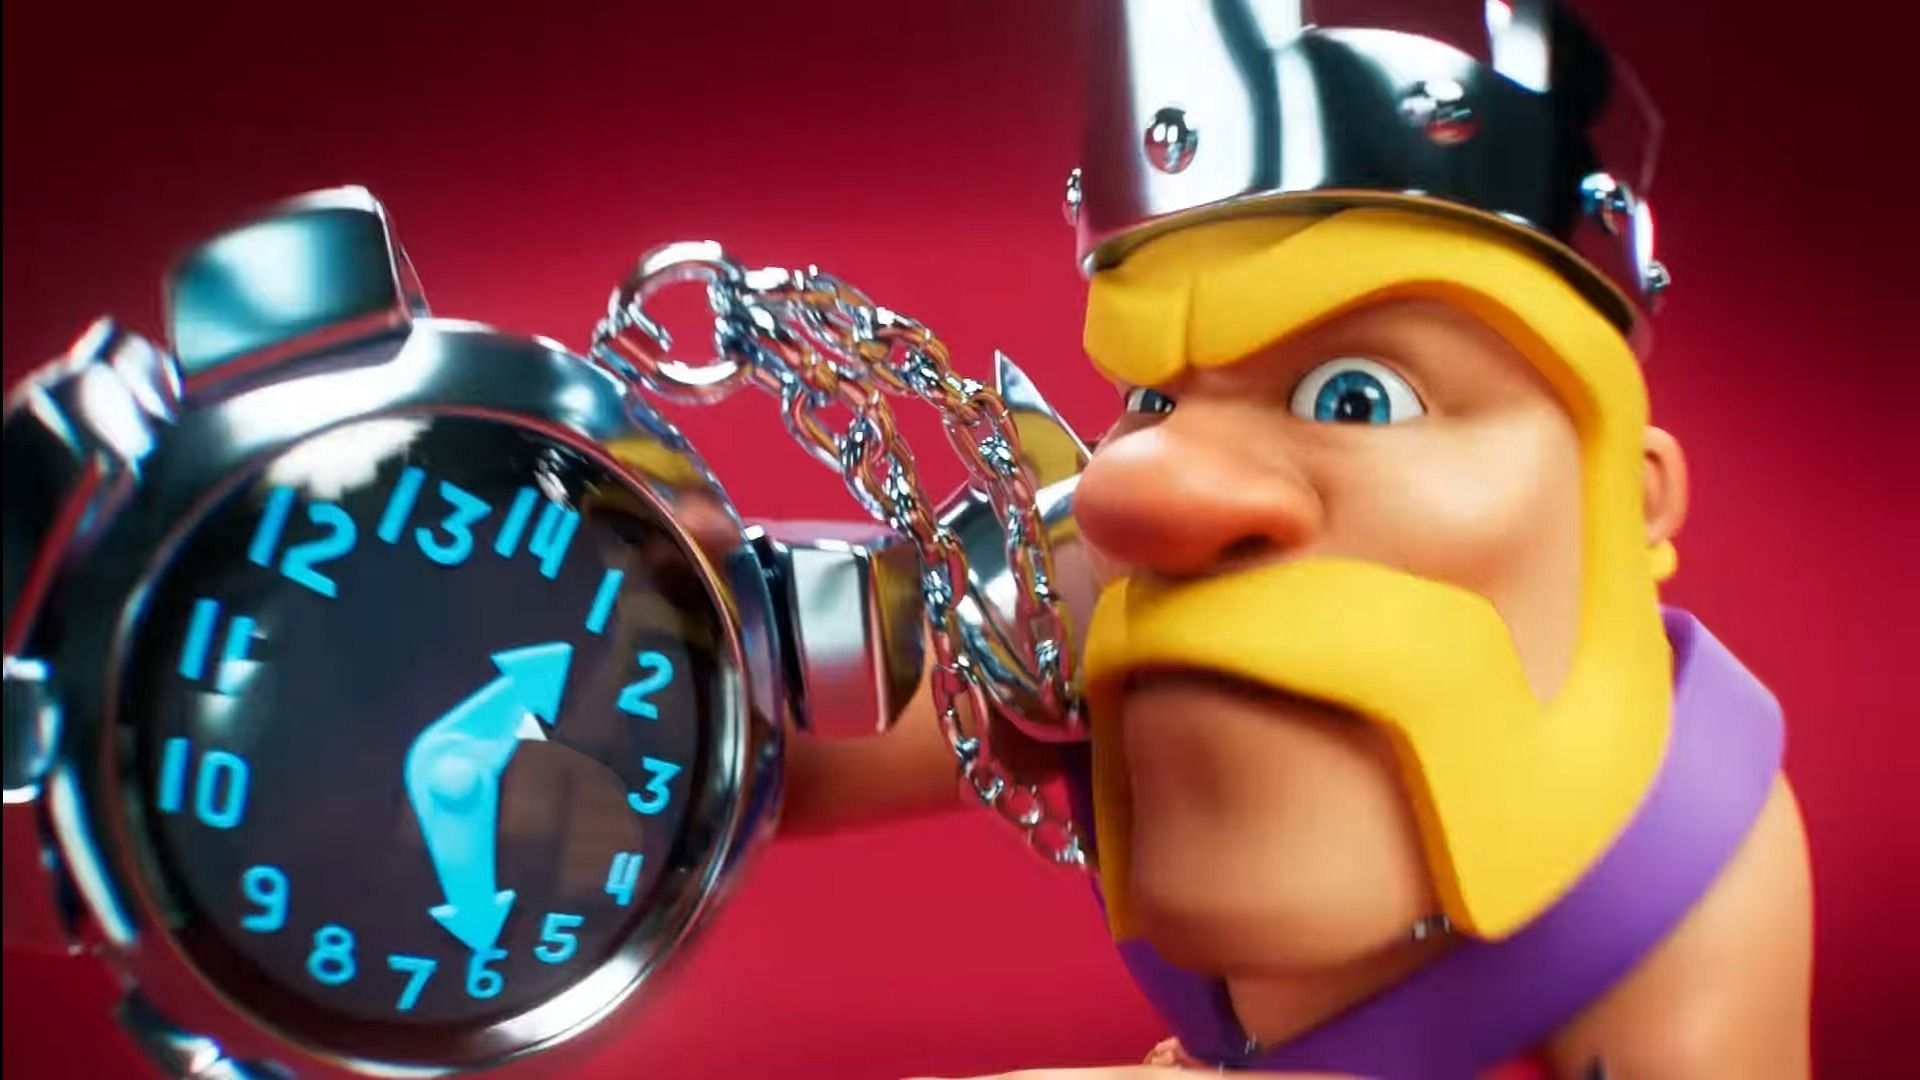 Clash of Clans easter eggs reveal a lot about the upcoming updates (Image via Supercell)